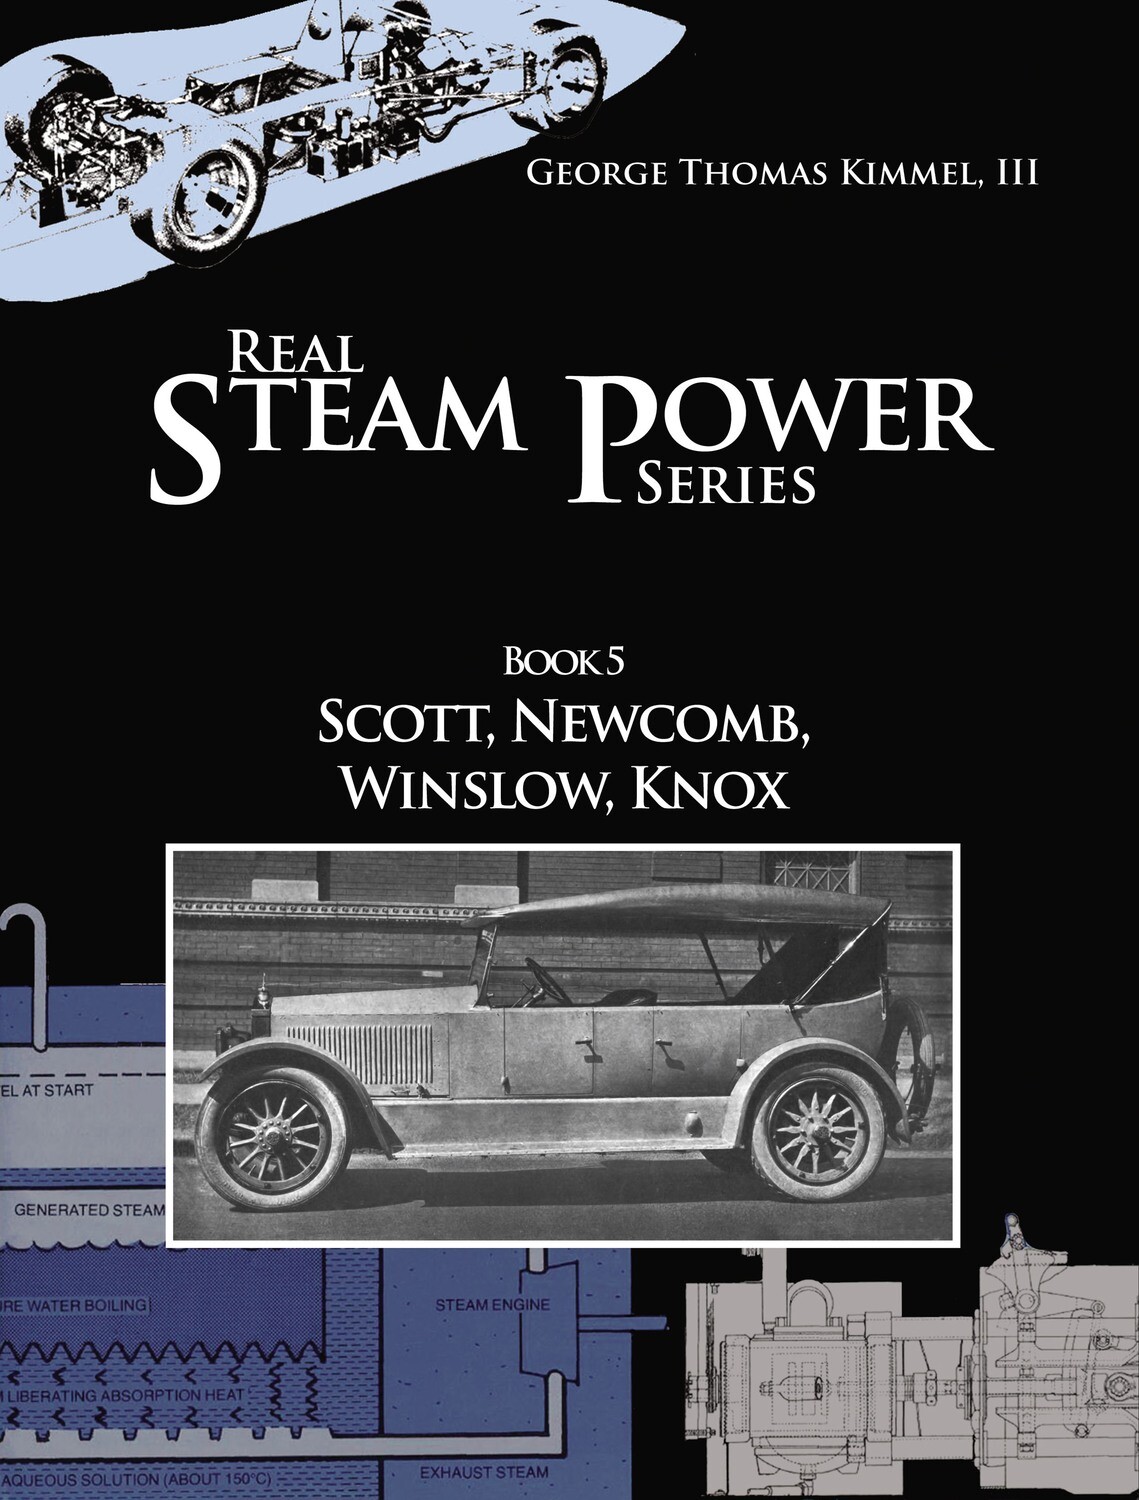 Scott, Newcomb, Winslow, Knox, Real Steam Power Series, Book 5